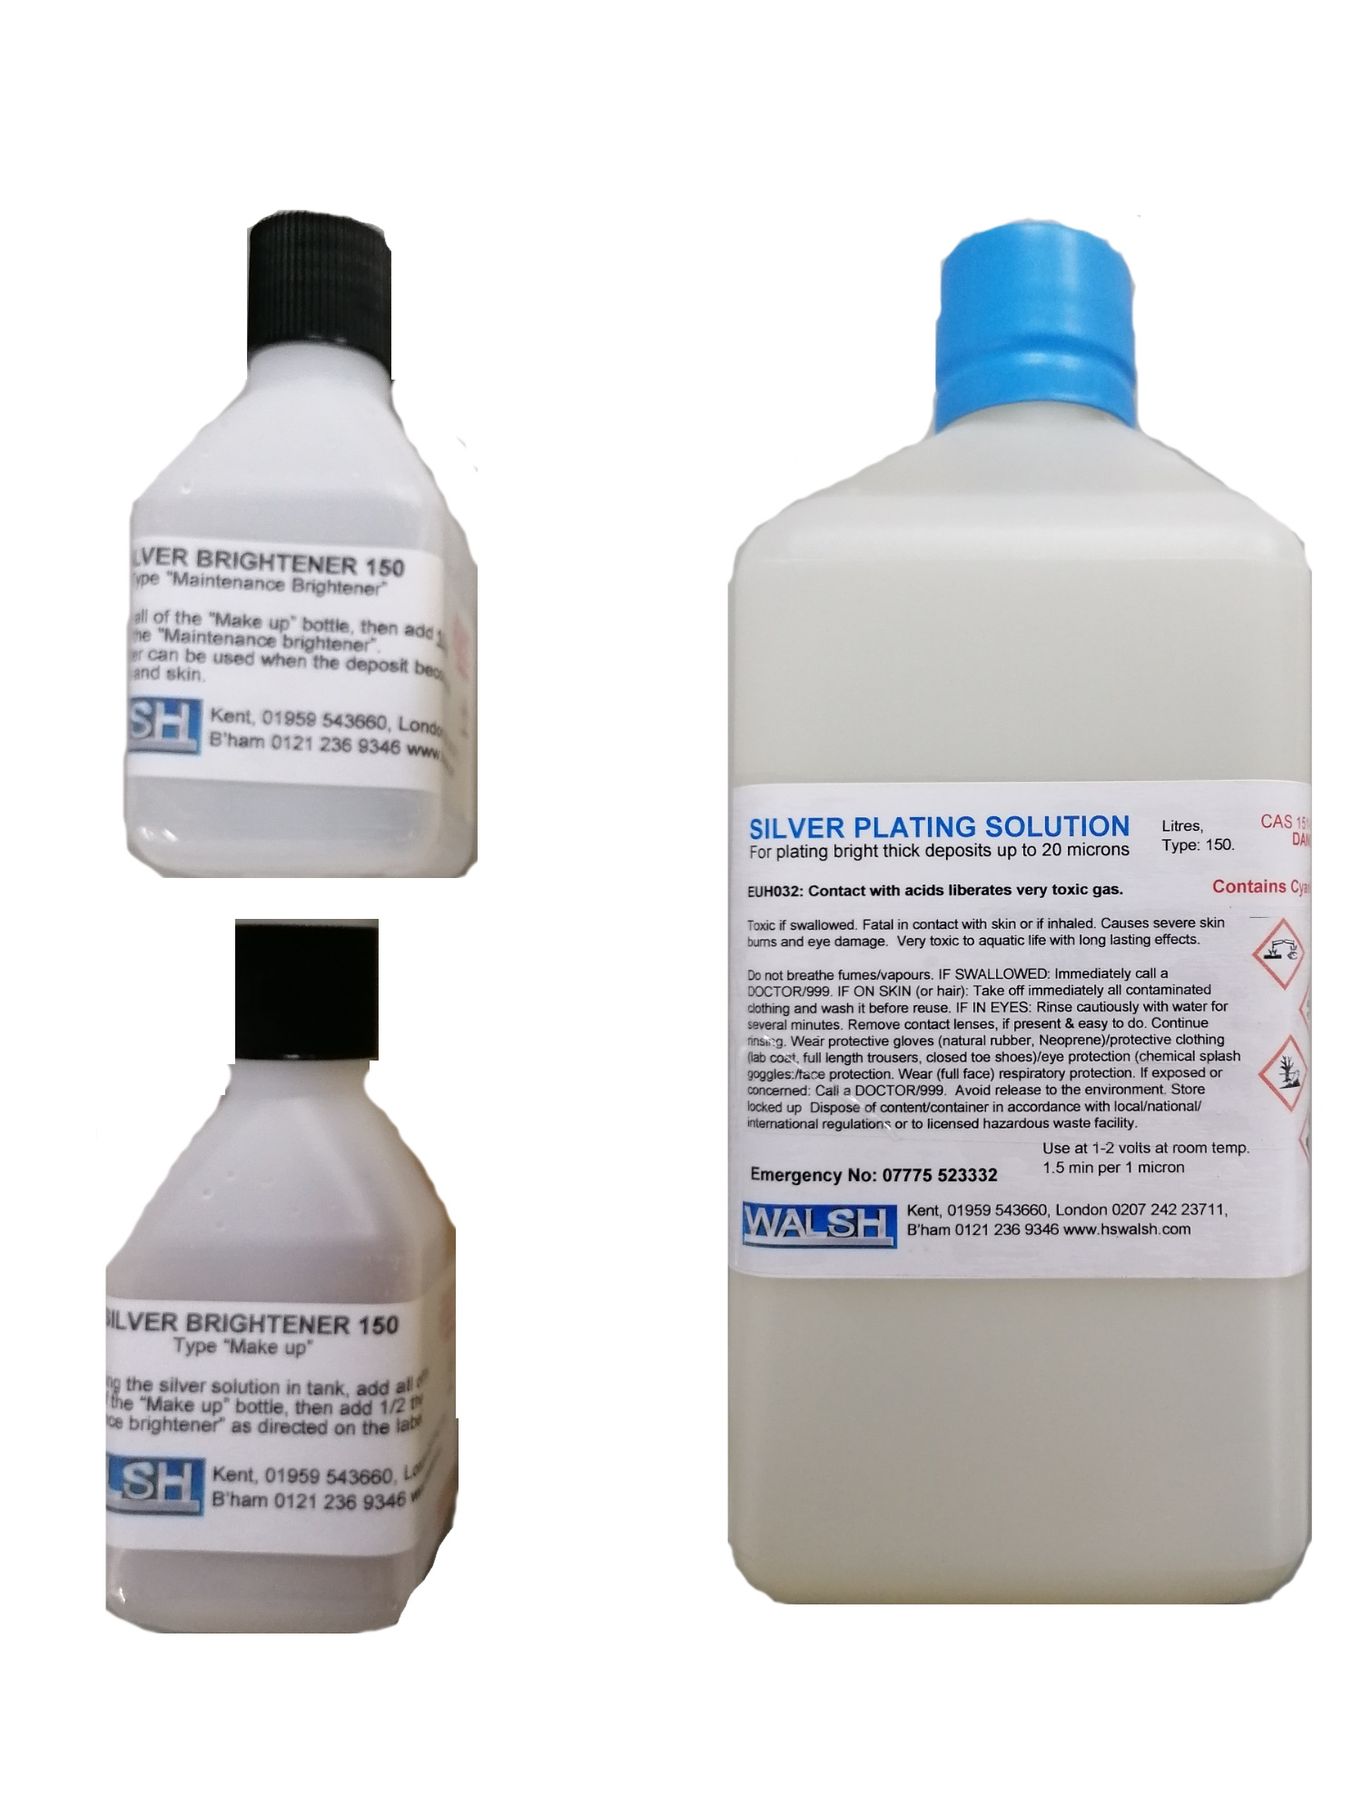 Silver plating solution, metal content ≈28.7g/L, Thermo Scientific Chemicals